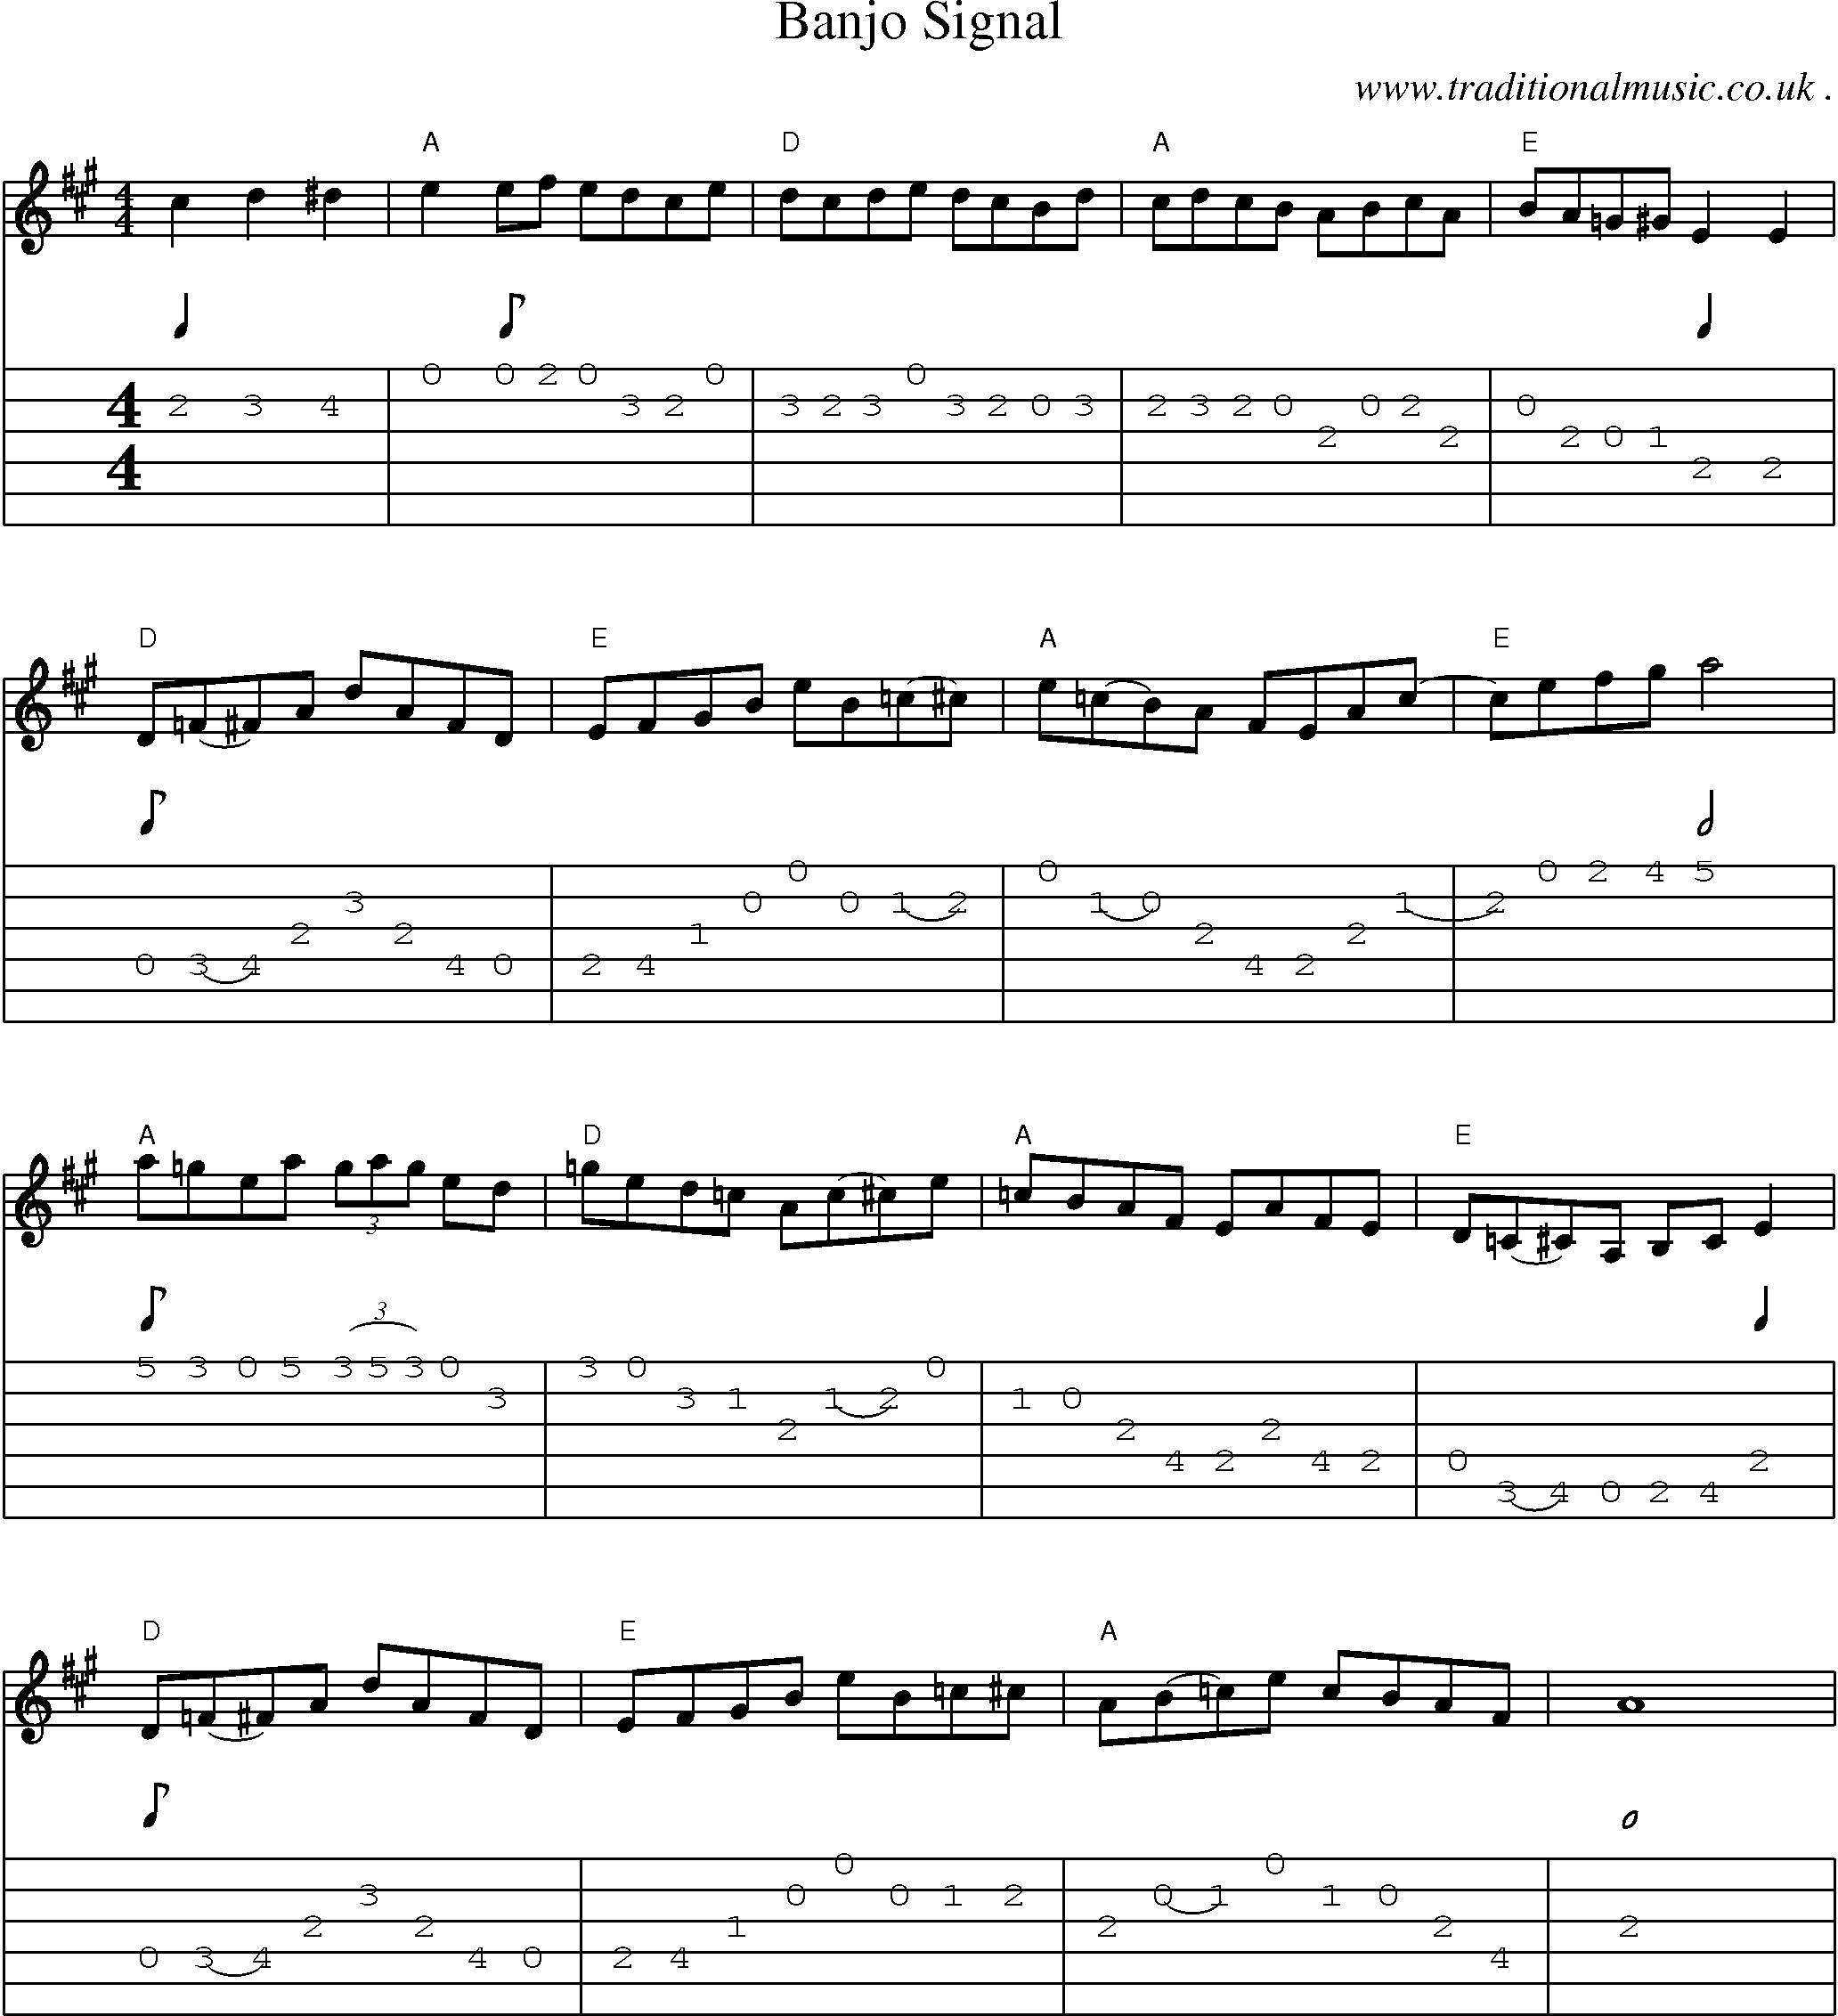 Music Score and Guitar Tabs for Banjo Signal